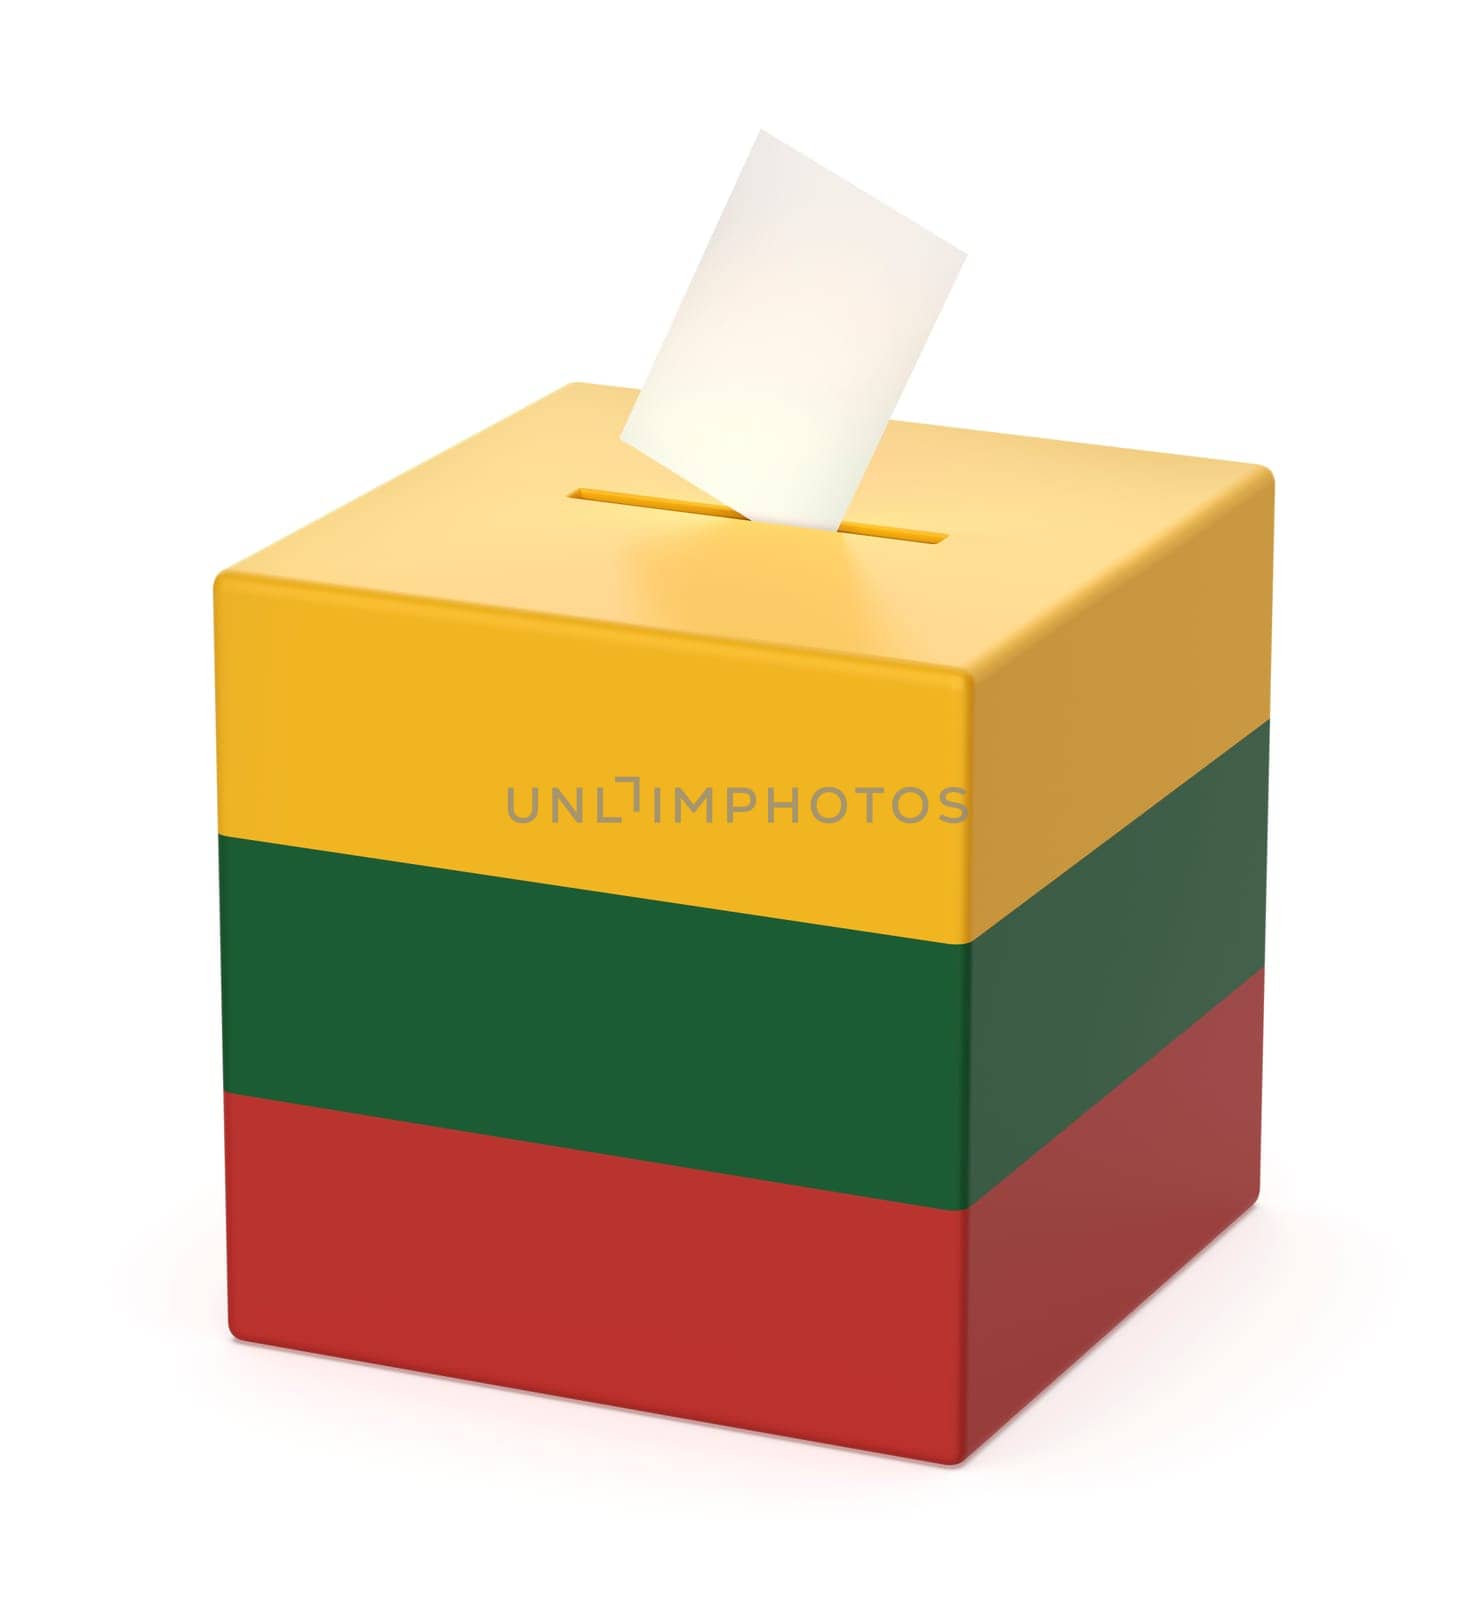 Concept image for elections in Lithuania by magraphics